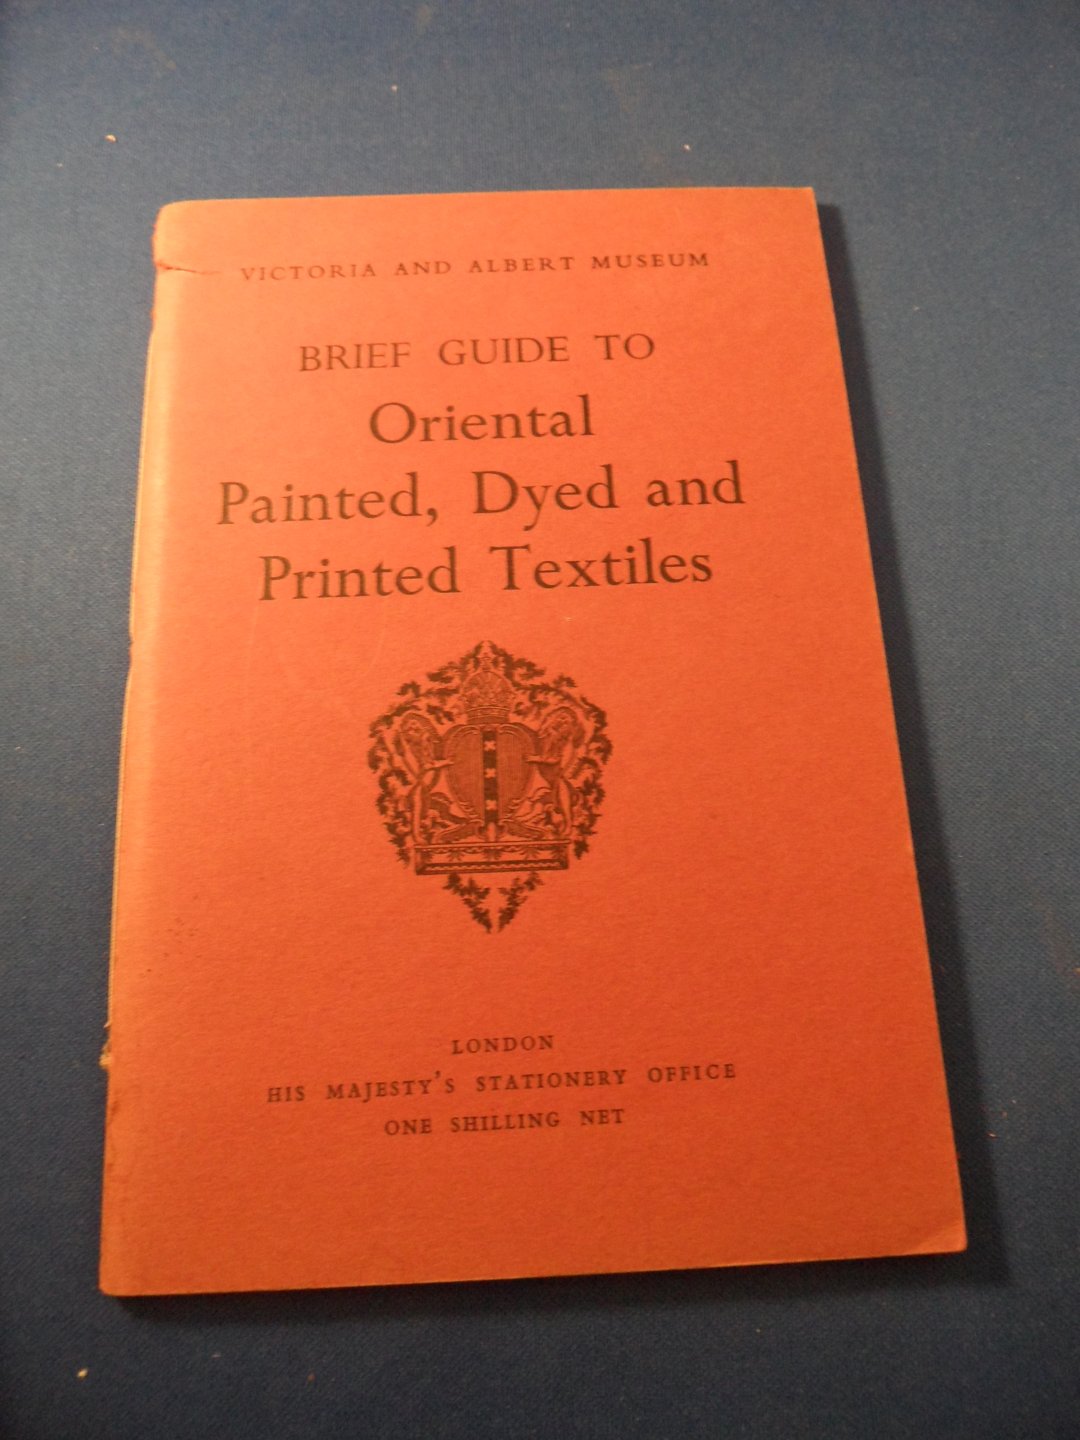  - Brief guide to Oriental painted, dyed and printed textiles